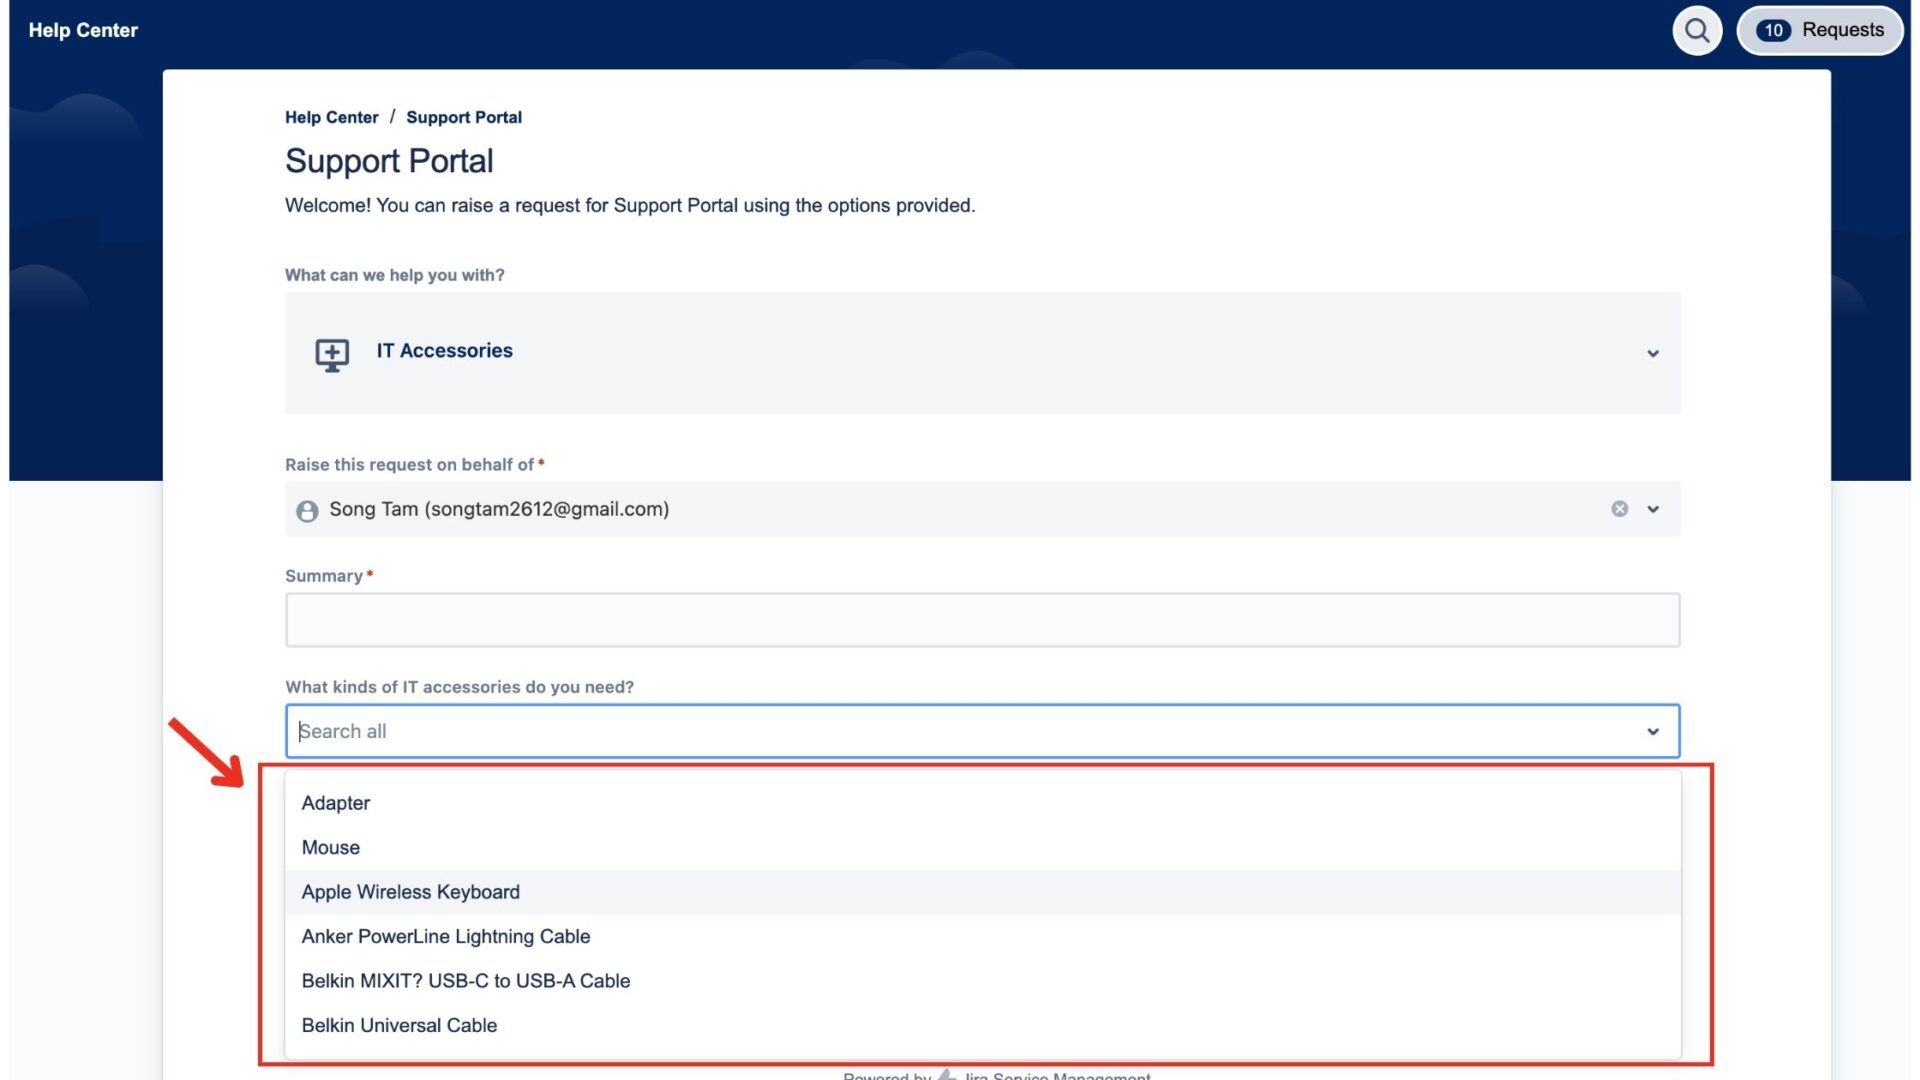 Easily integrate data from AssetIT into a request ticket in Jira Service Management